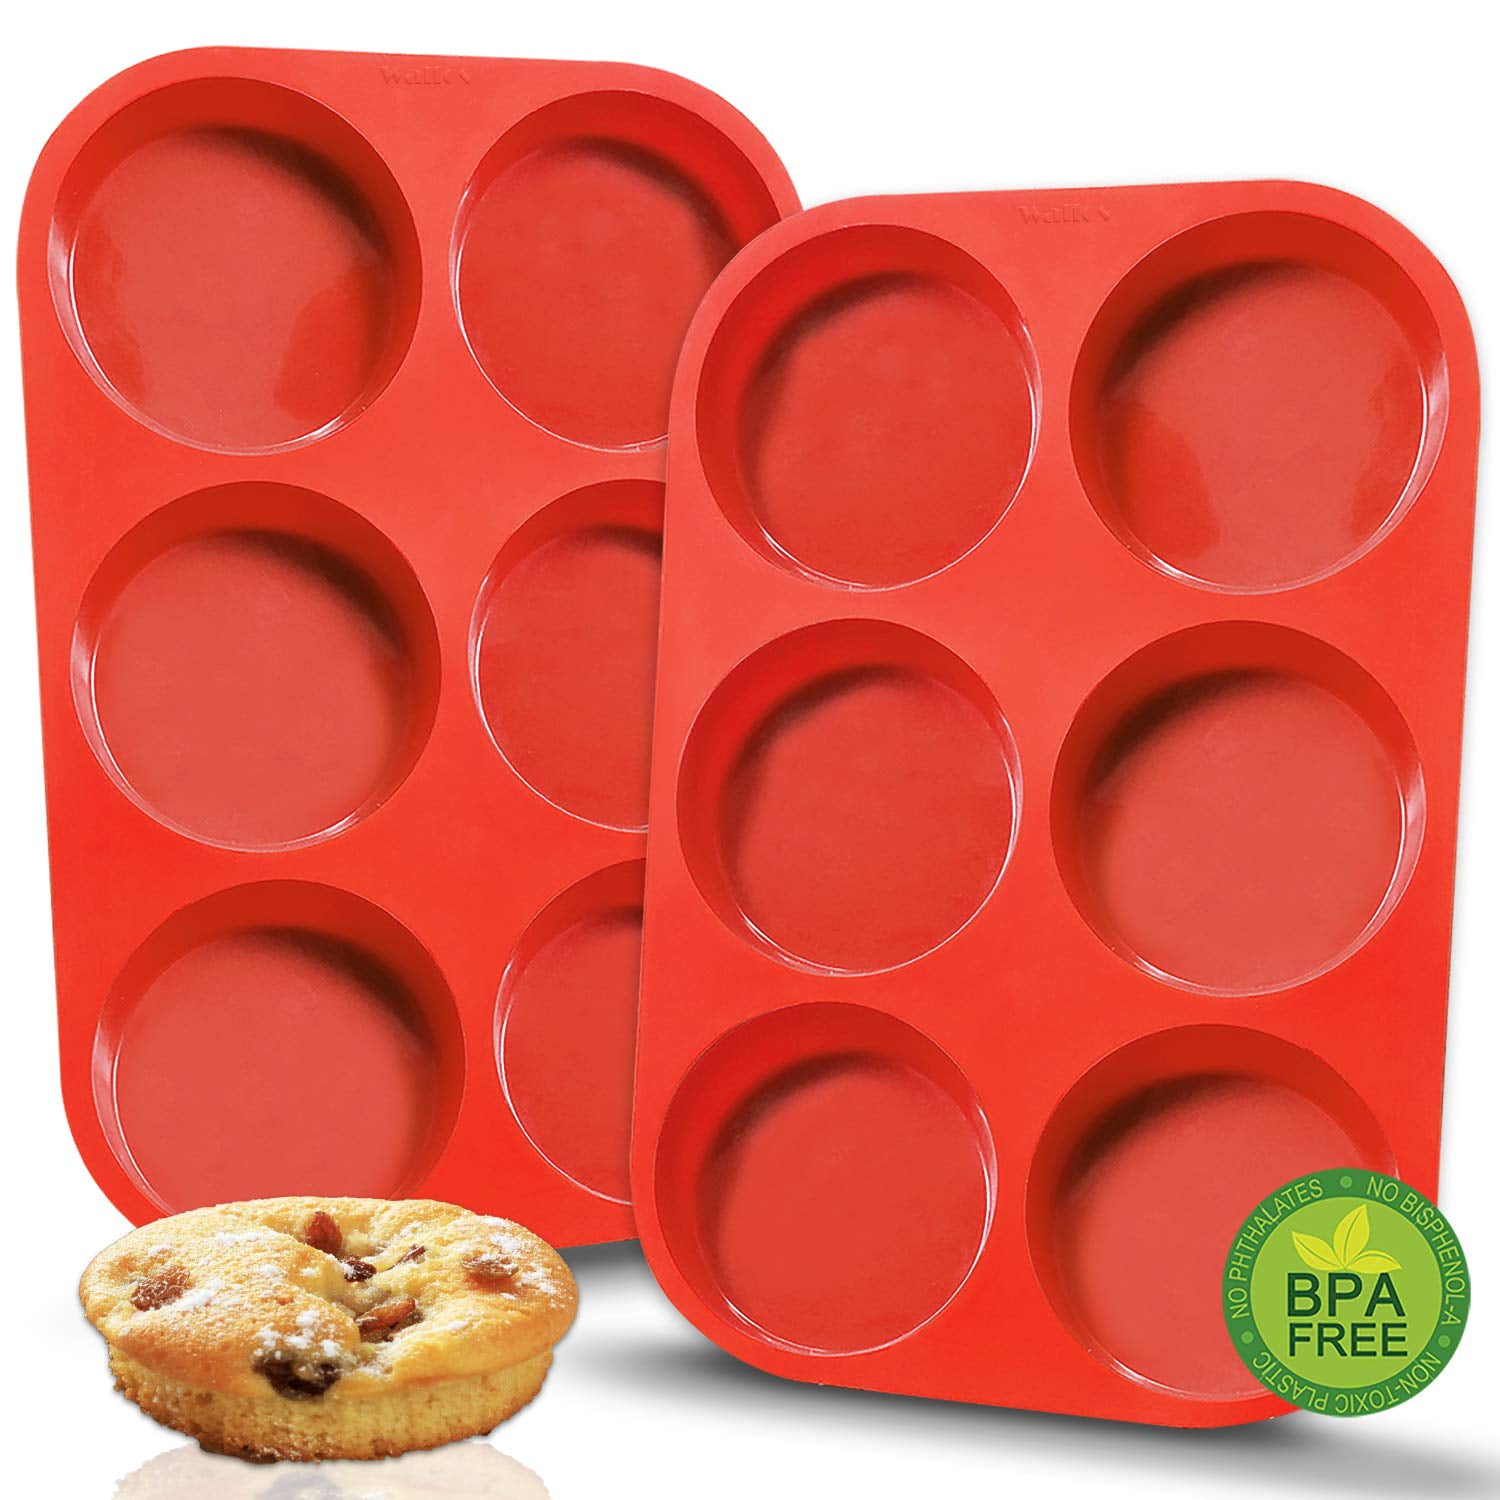 Walfos 6 Cup Jumbo Silicone Texas Muffin Pan + 4 Pieces Non-Stick Silicone  Bread Loaf Pan Super Value Set.